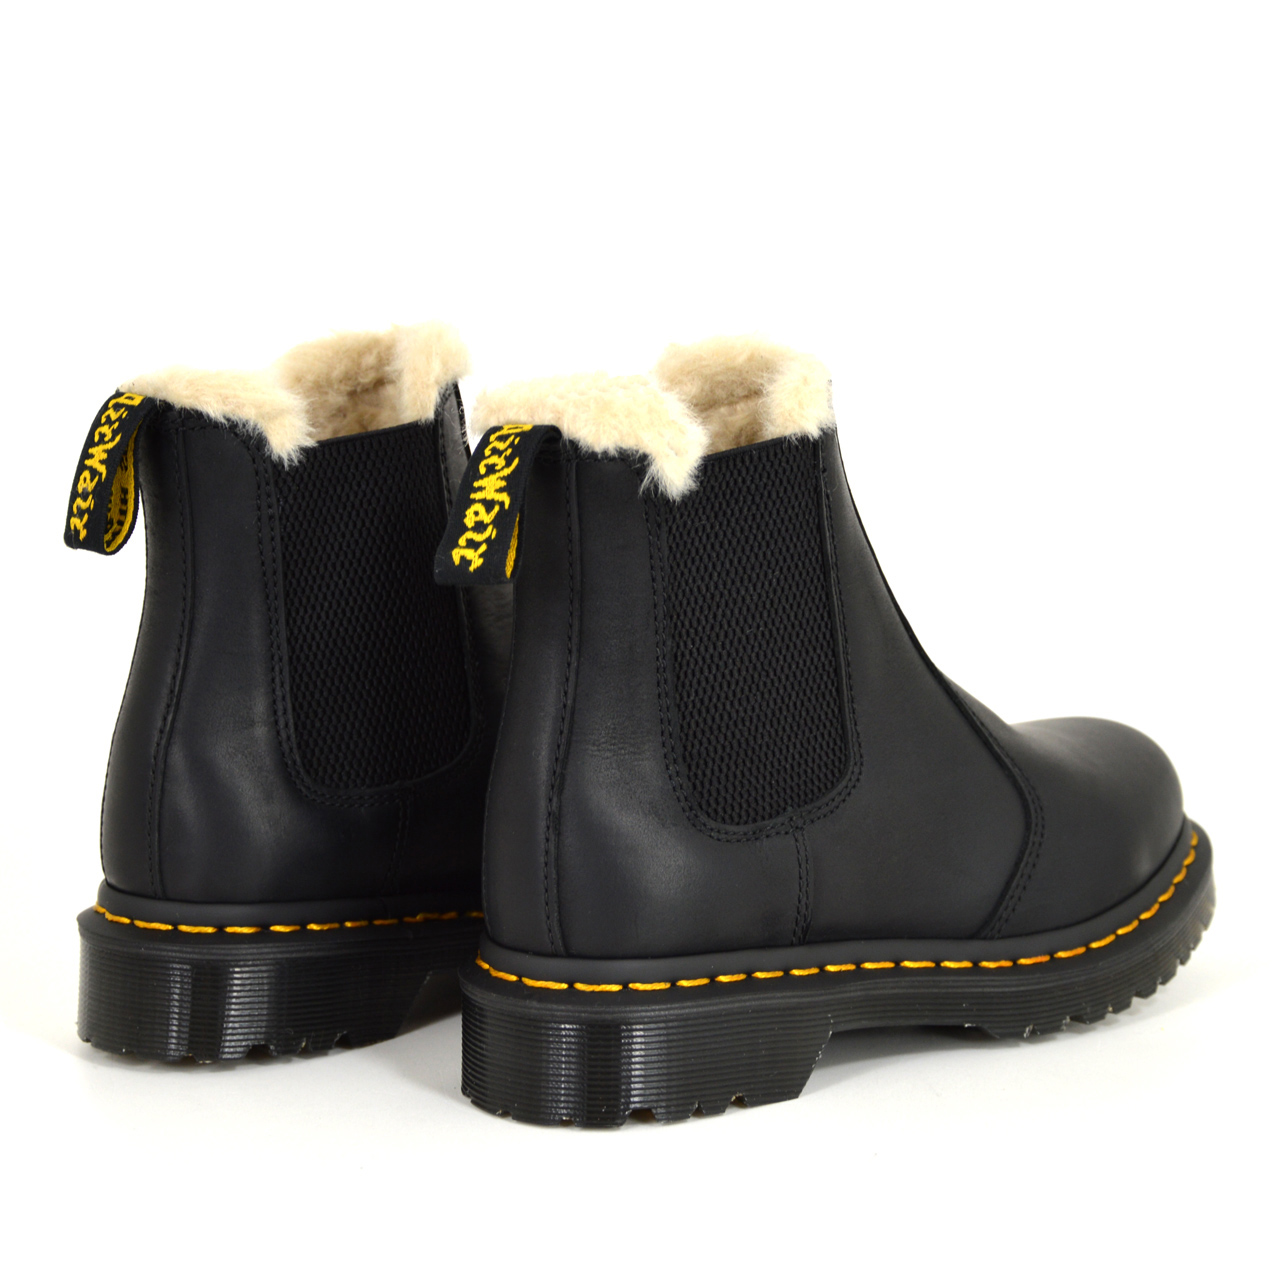 Dr. Martens - 2976 LEONORE - Black Burnished Wyoming